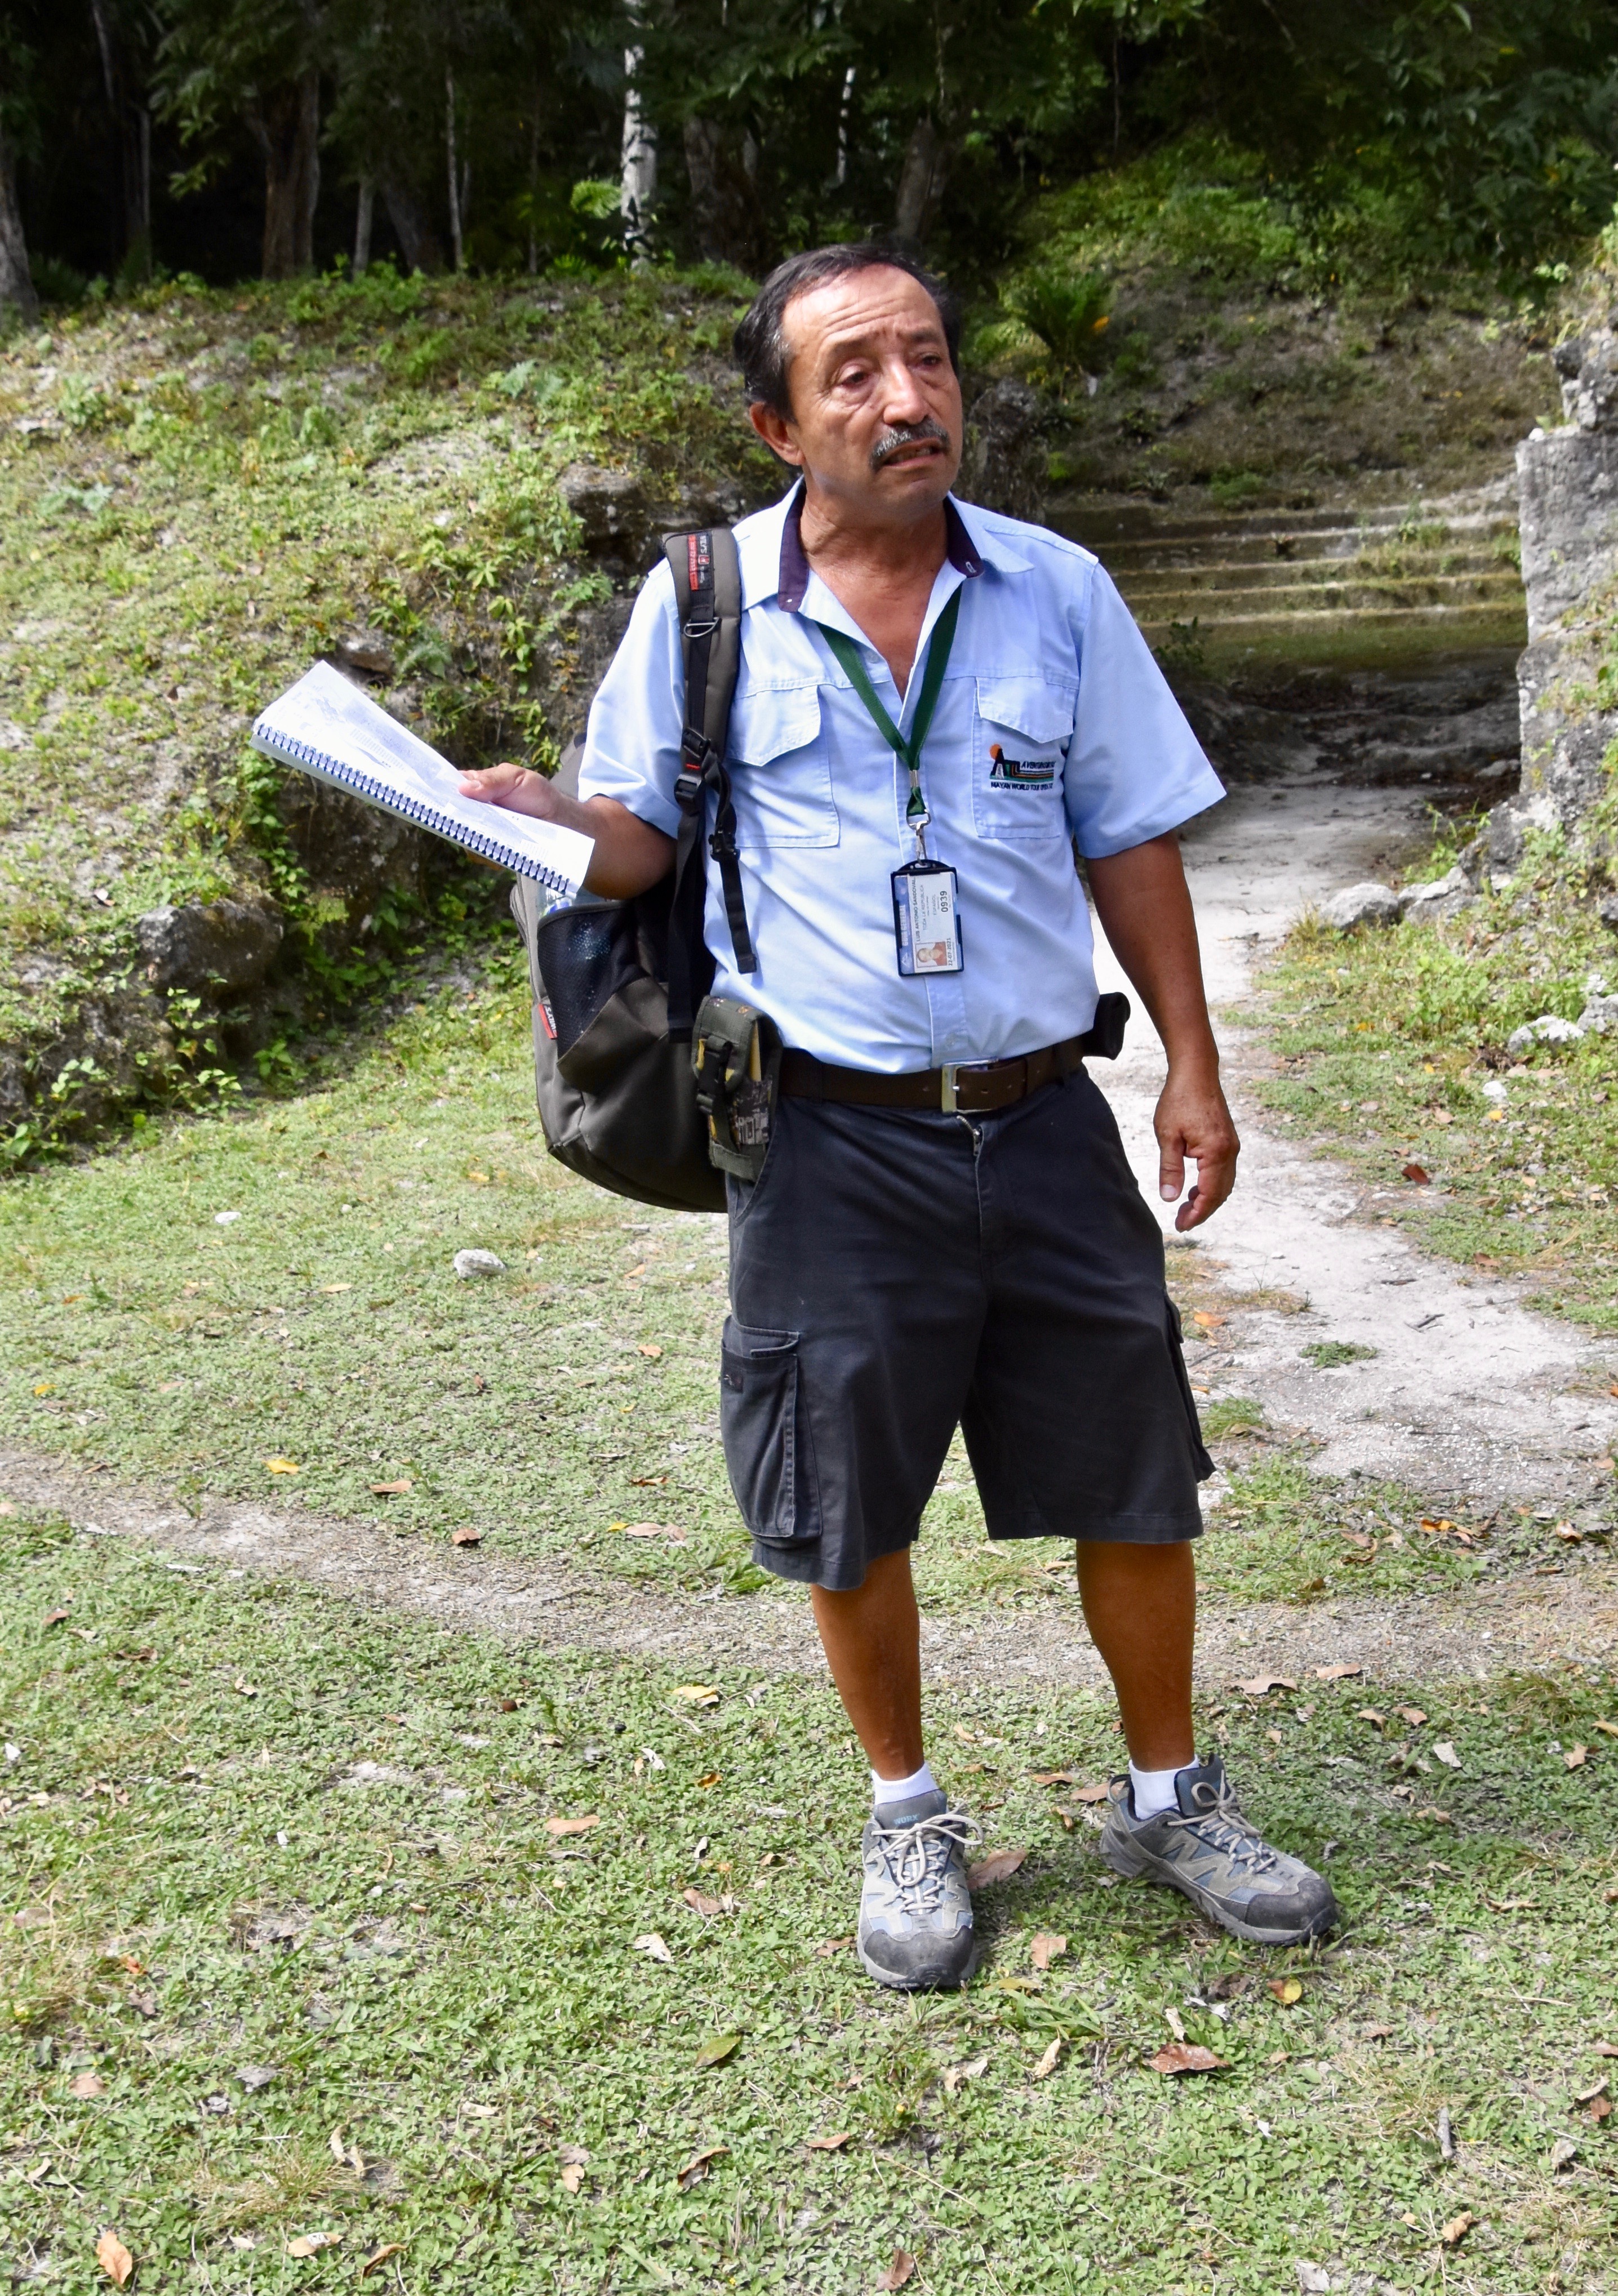 Our Guide Luis at Tikal